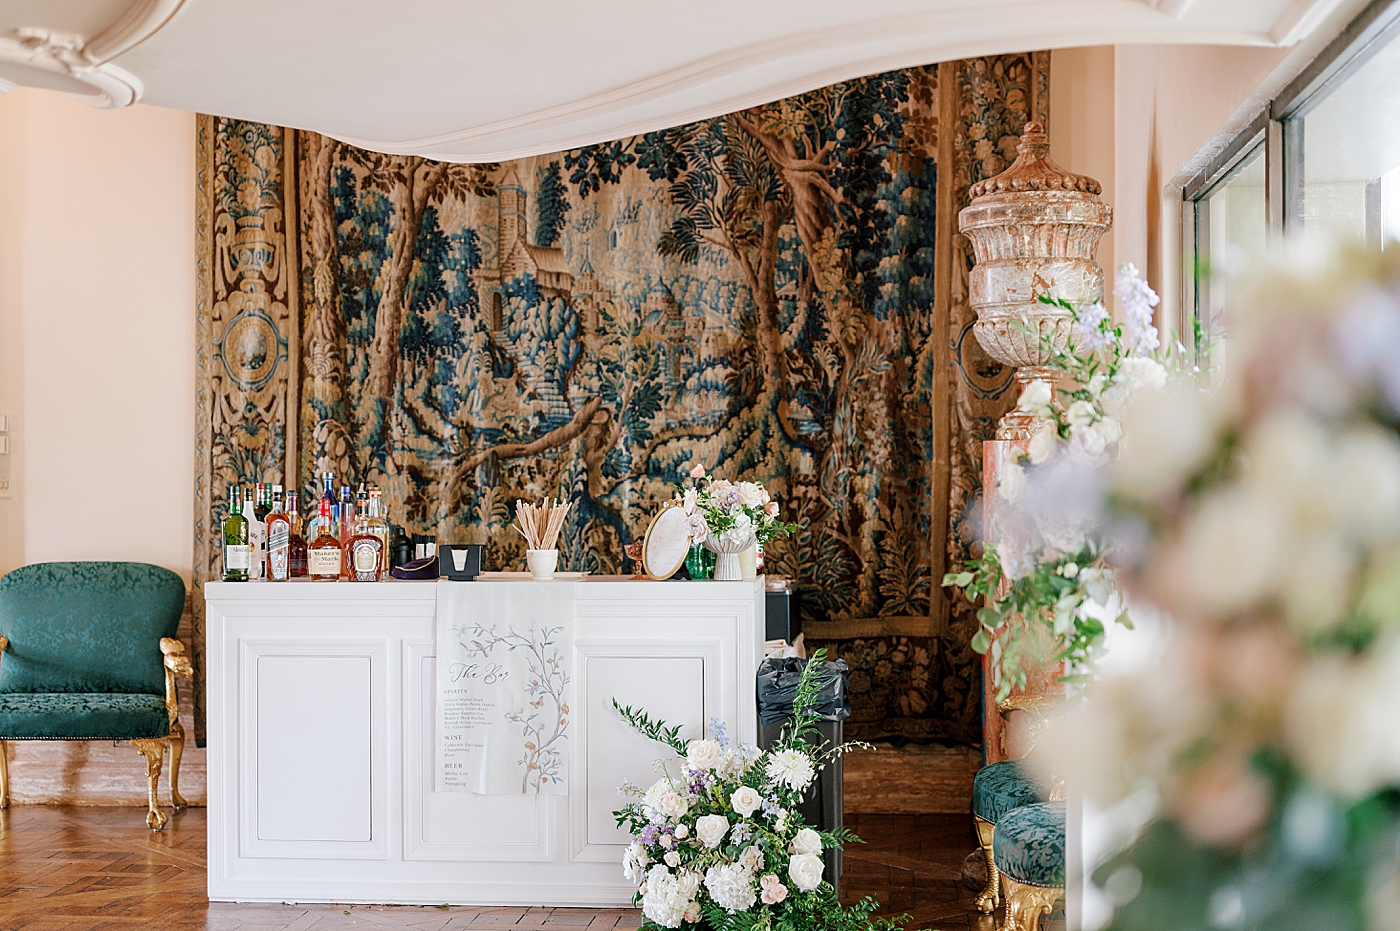 Wedding bar decorated with flowers and greenery | Image by Hope Helmuth Photography